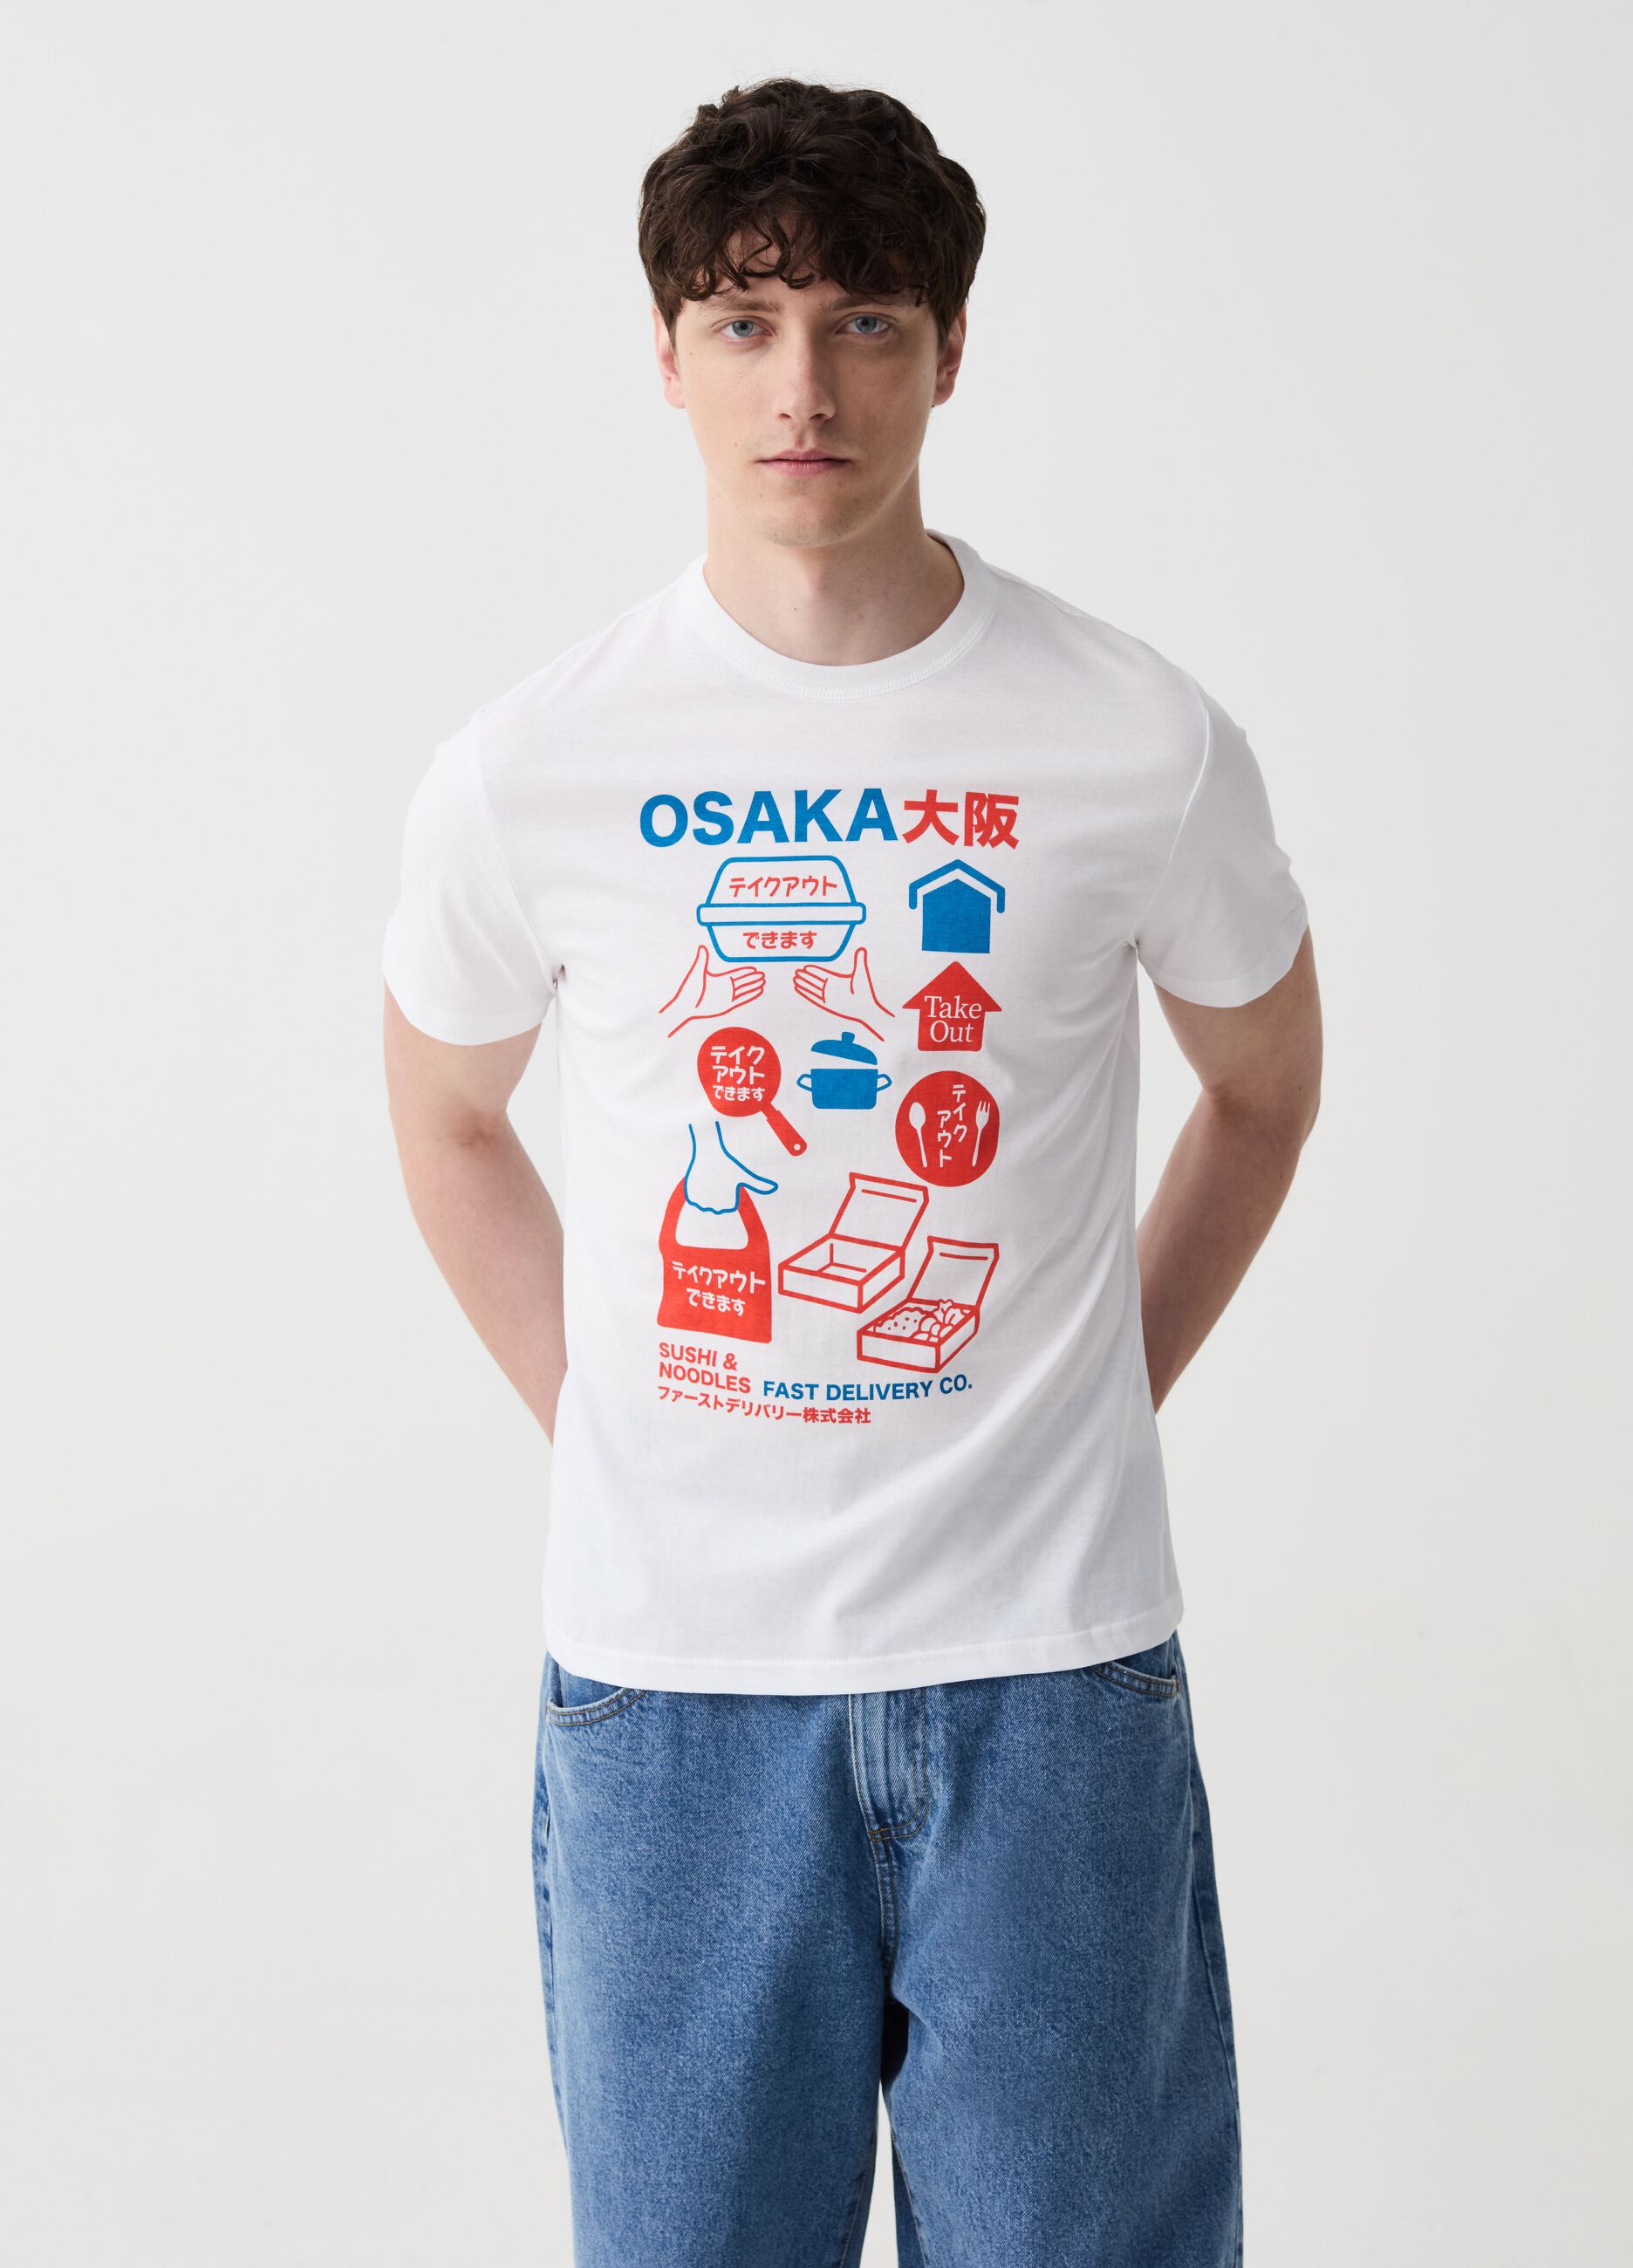 T-shirt with sushi and noodles print